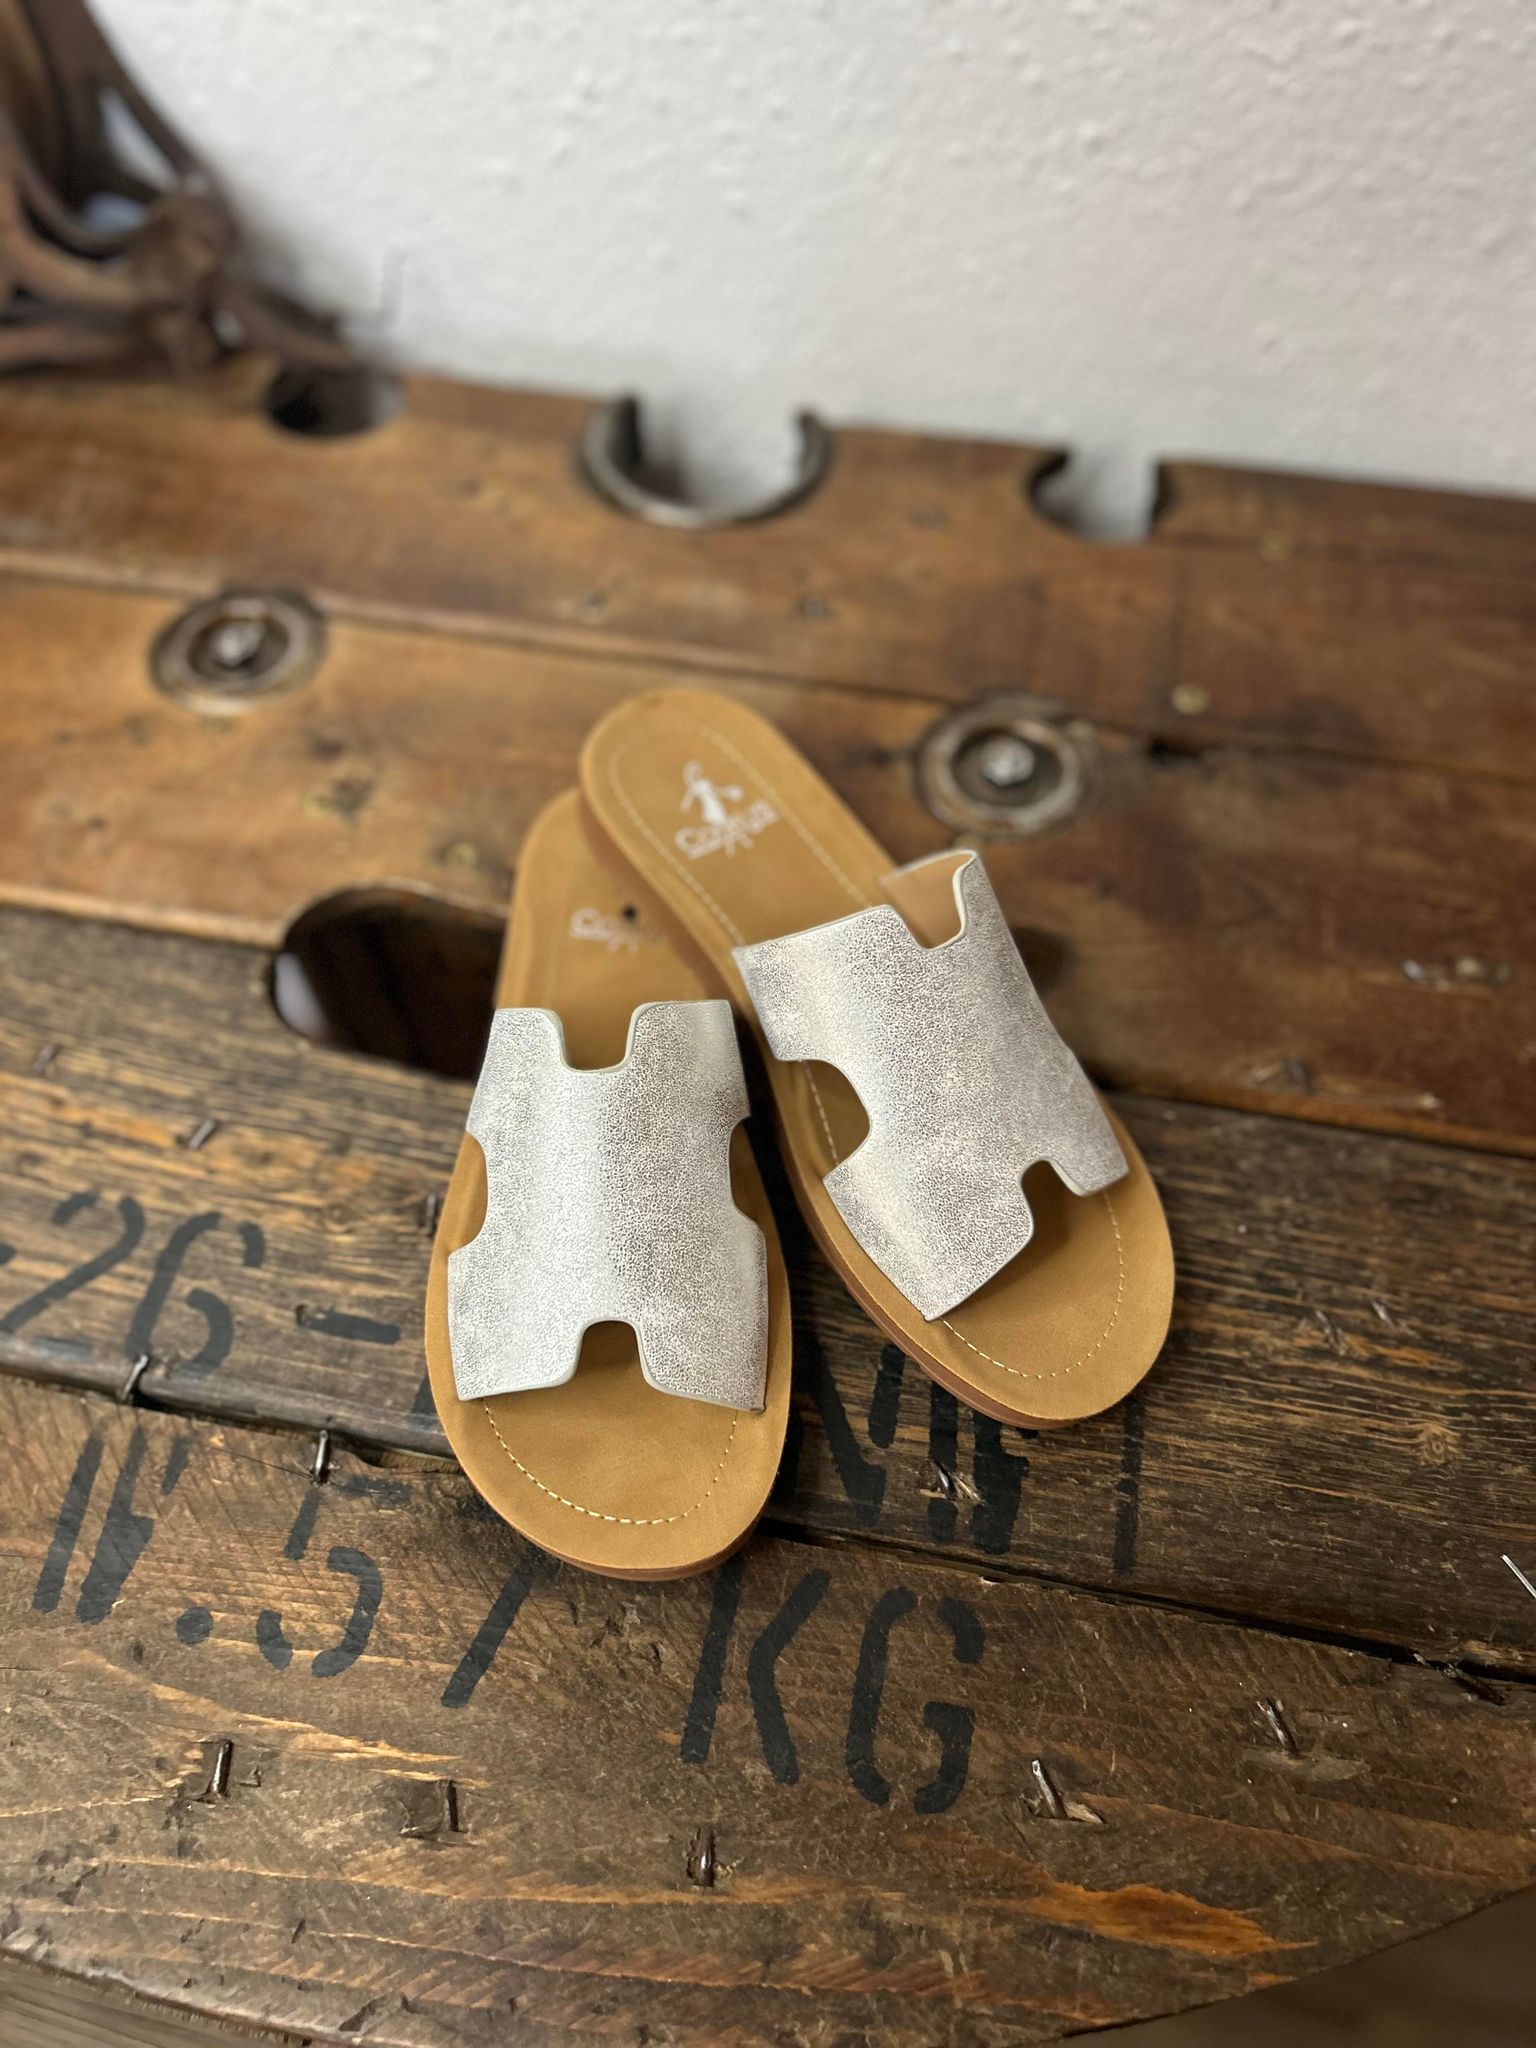 Corkys Bogalusa Sandals in New Silver Metallic-Sandals-Corkys Footwear-Lucky J Boots & More, Women's, Men's, & Kids Western Store Located in Carthage, MO